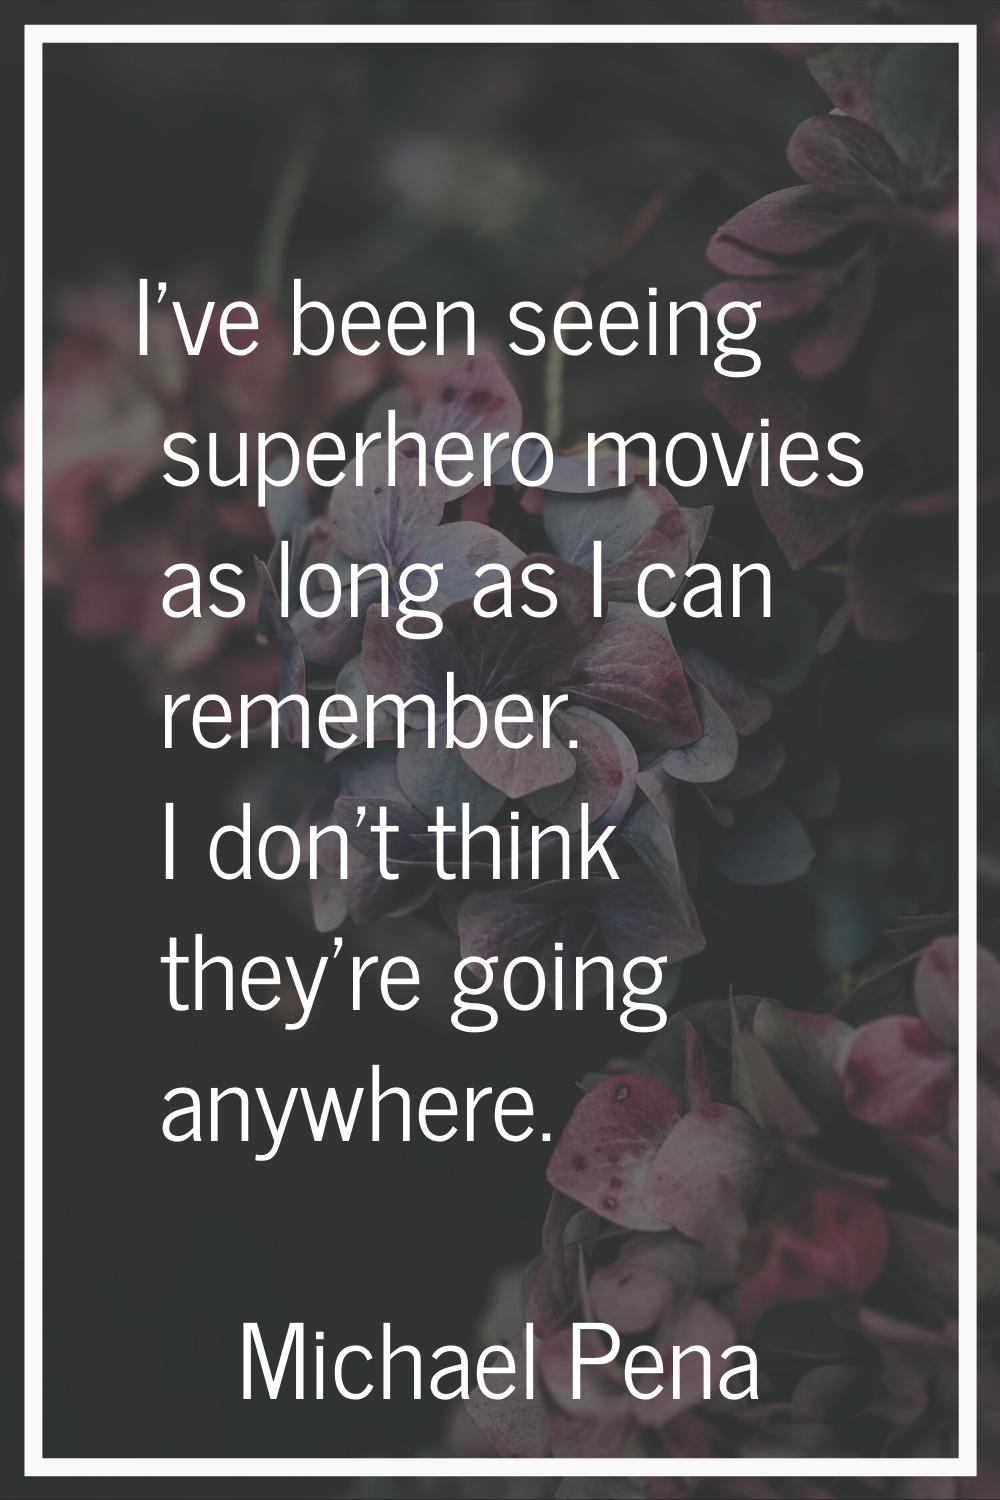 I've been seeing superhero movies as long as I can remember. I don't think they're going anywhere.